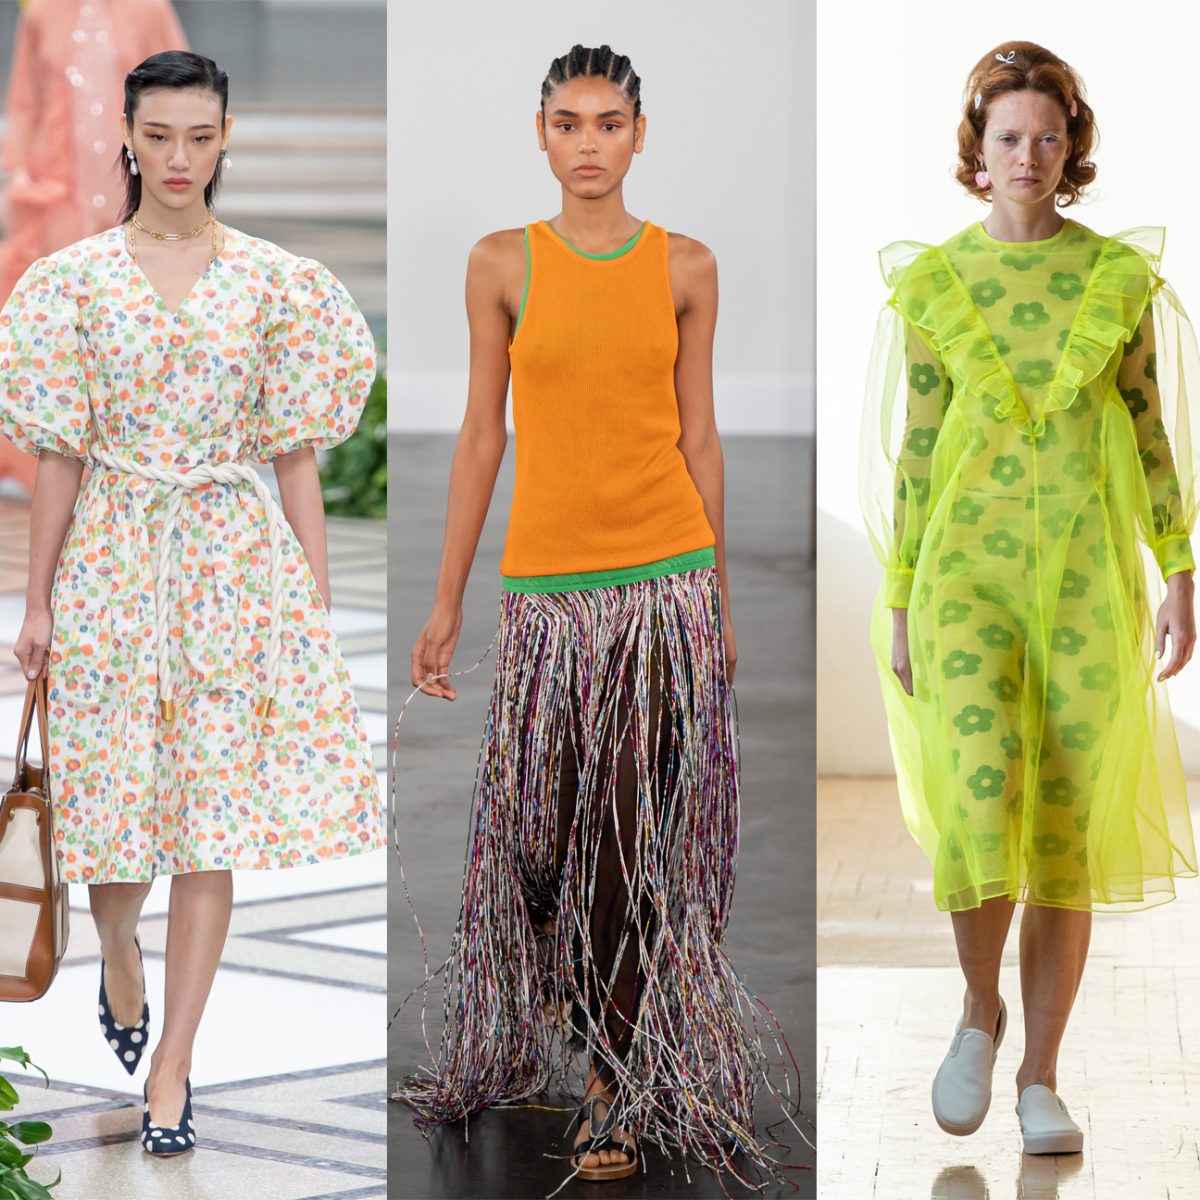 The 9 Most Important Trends From the Spring 2020 Season